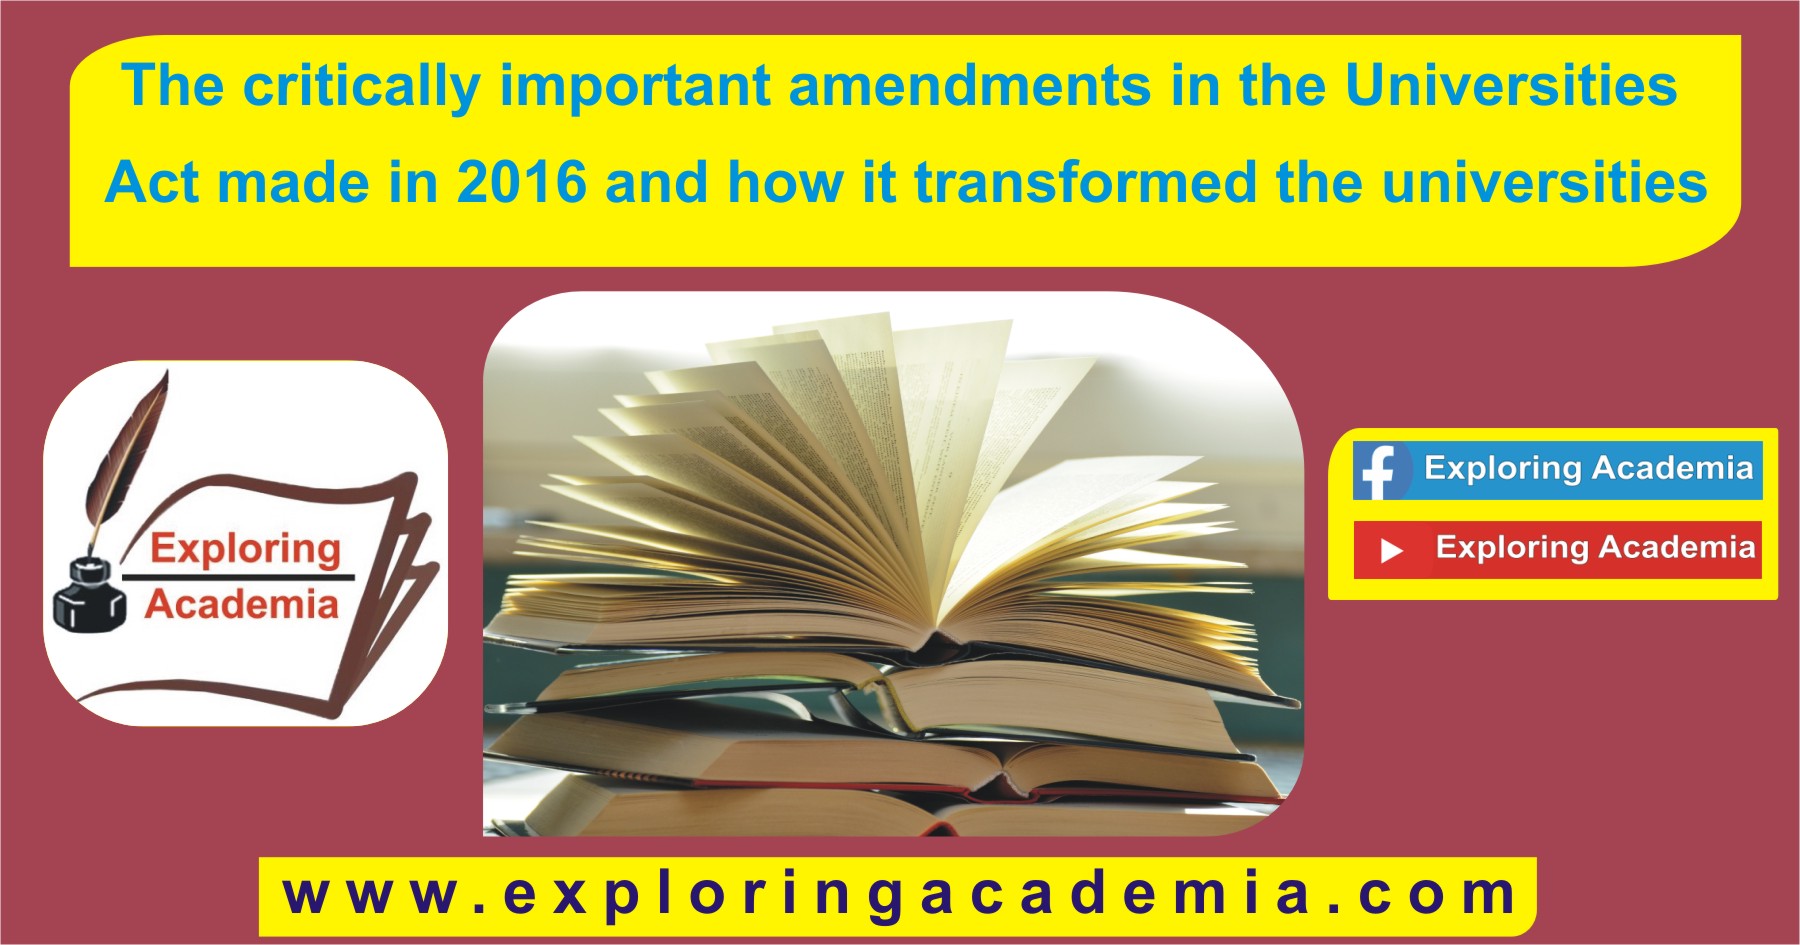 The critically important amendments in the Universities’ Act made in 2016 and how it transformed the universities.